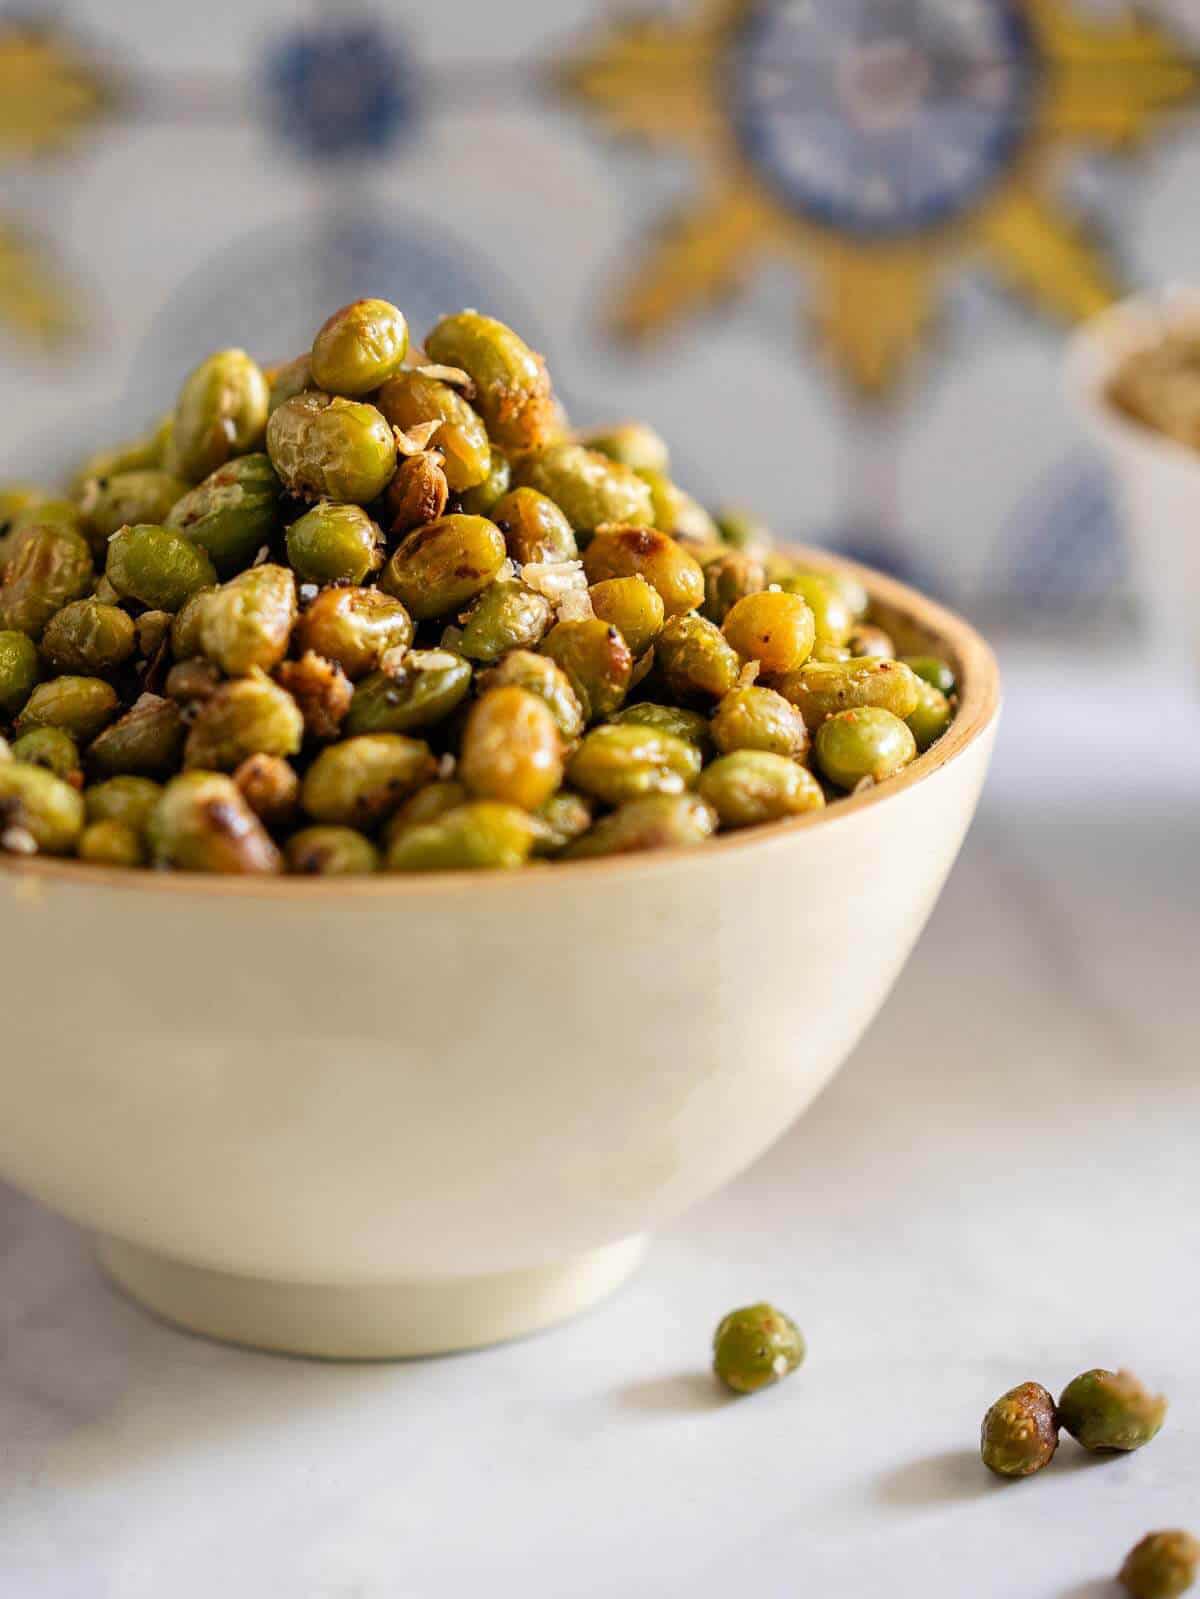 served roasted edamame beans in a small bowl.